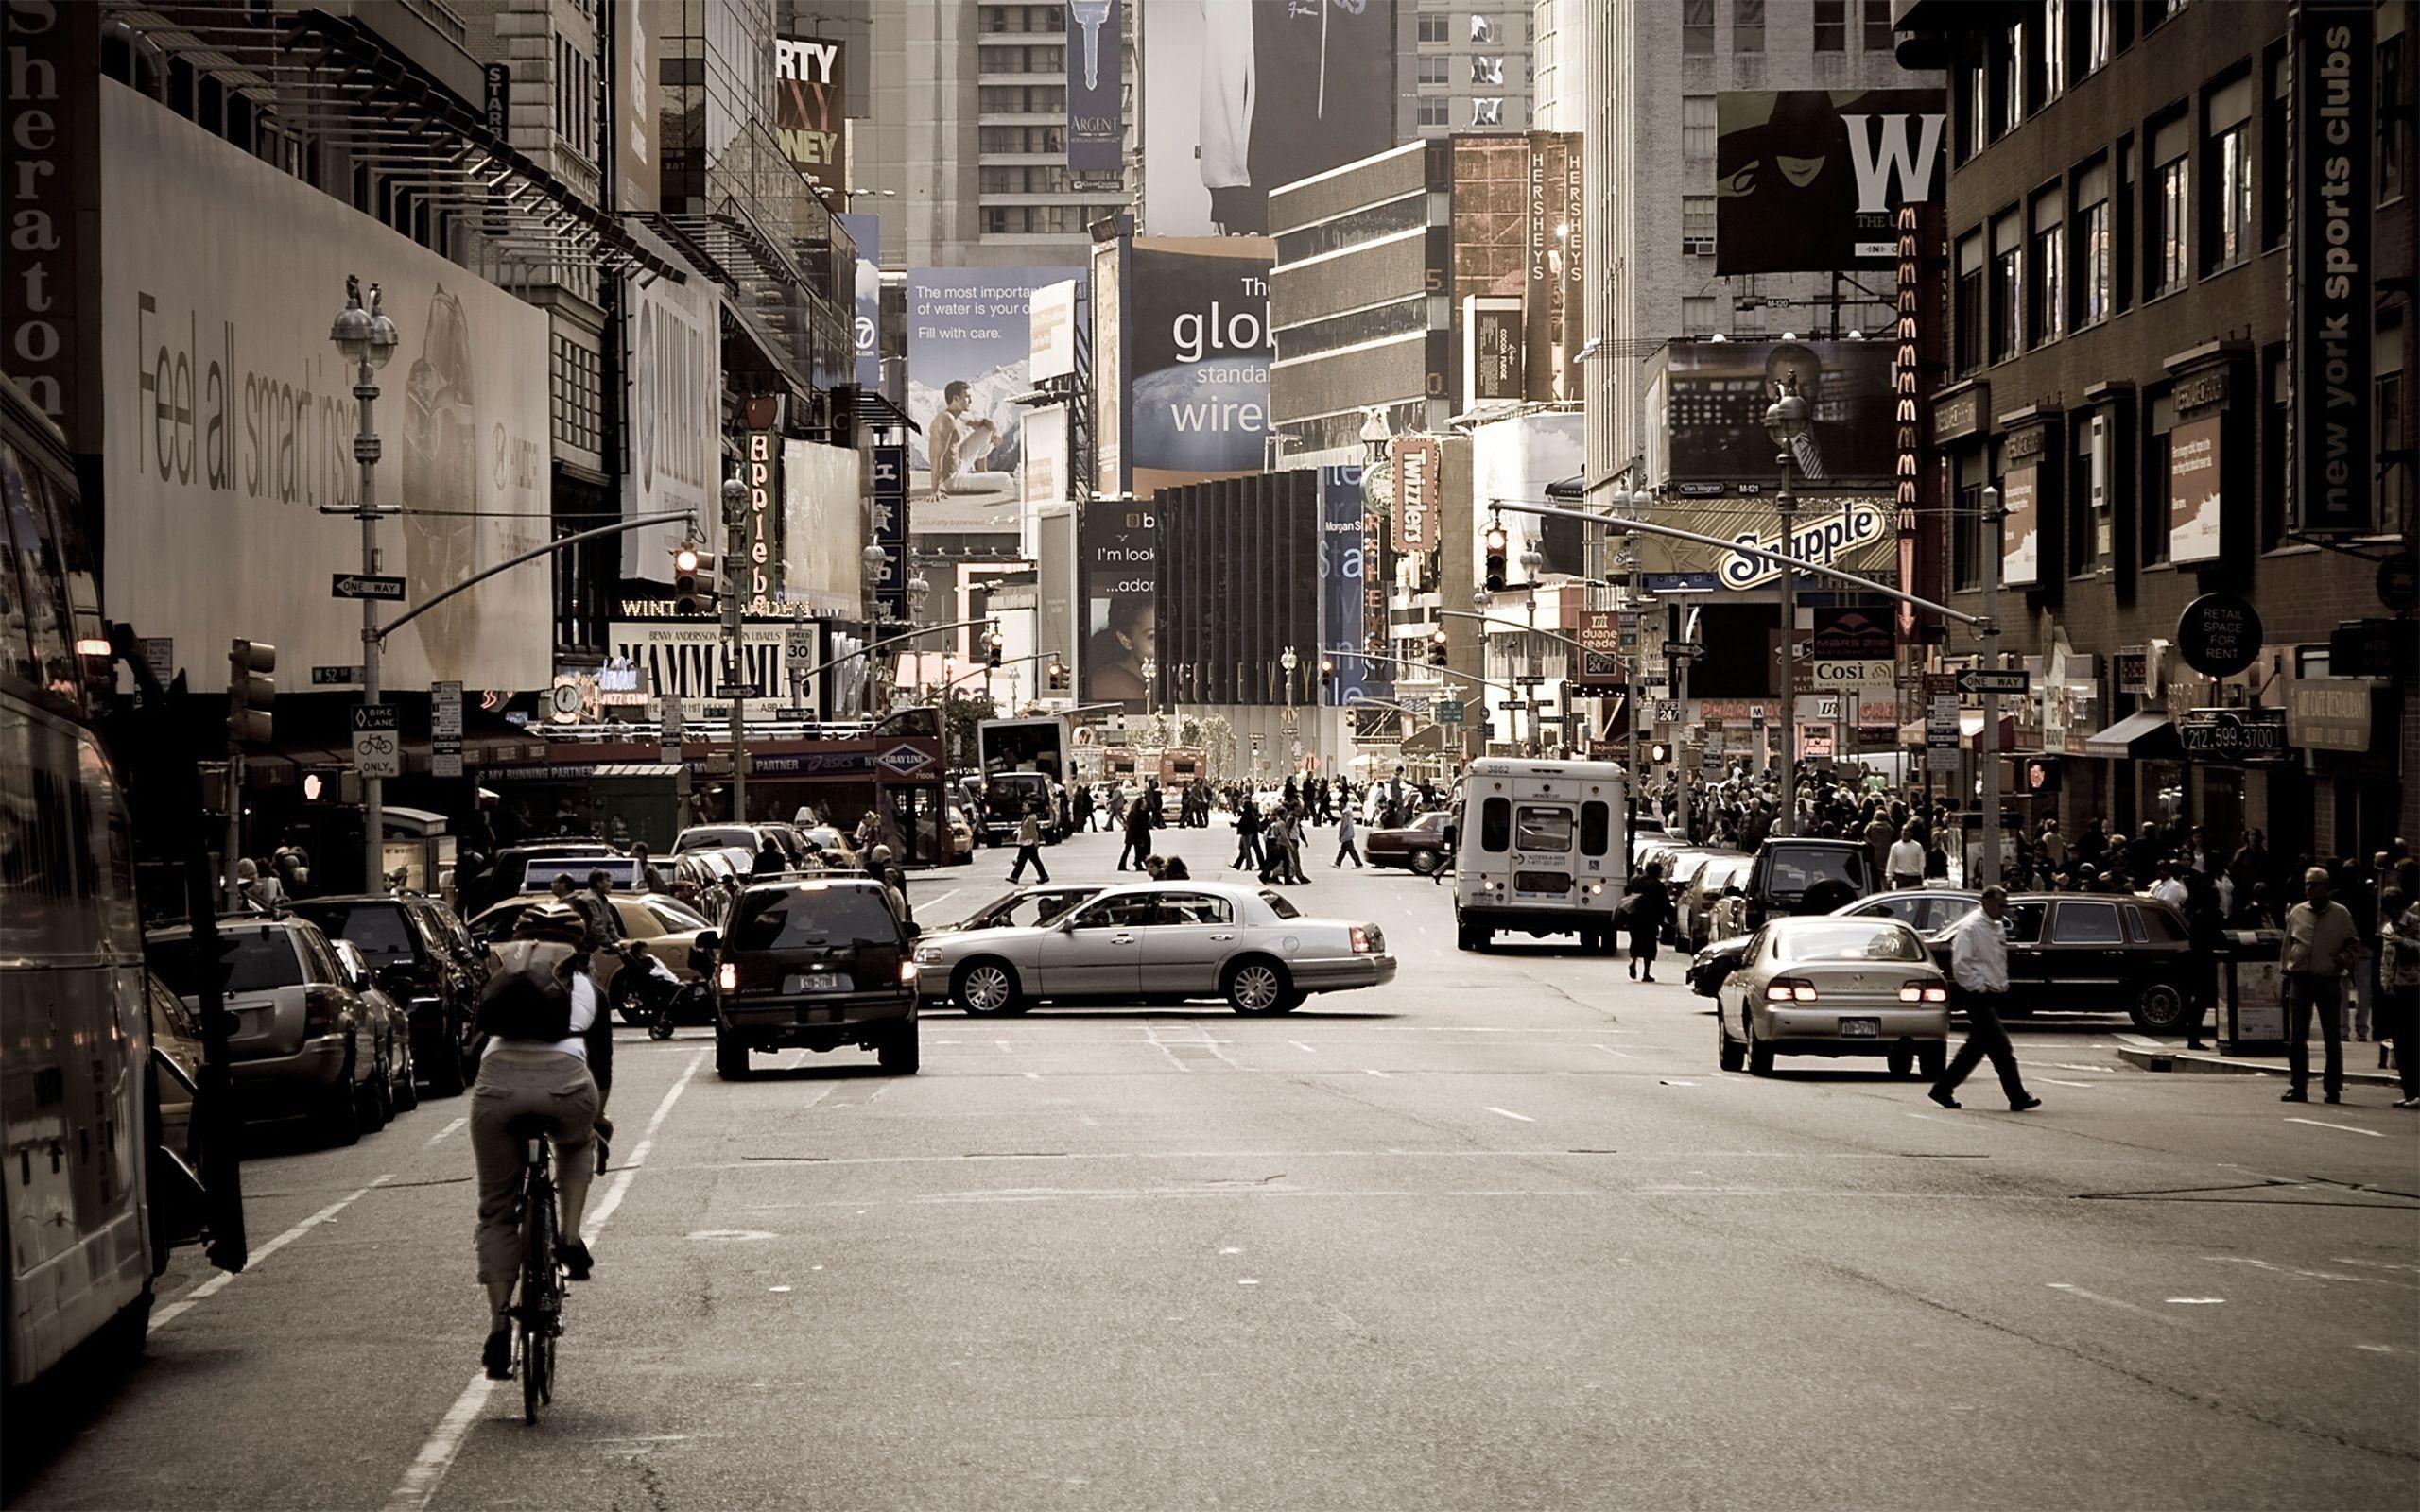 Broadway in New York City. October 2007 HD Wallpaper. Background